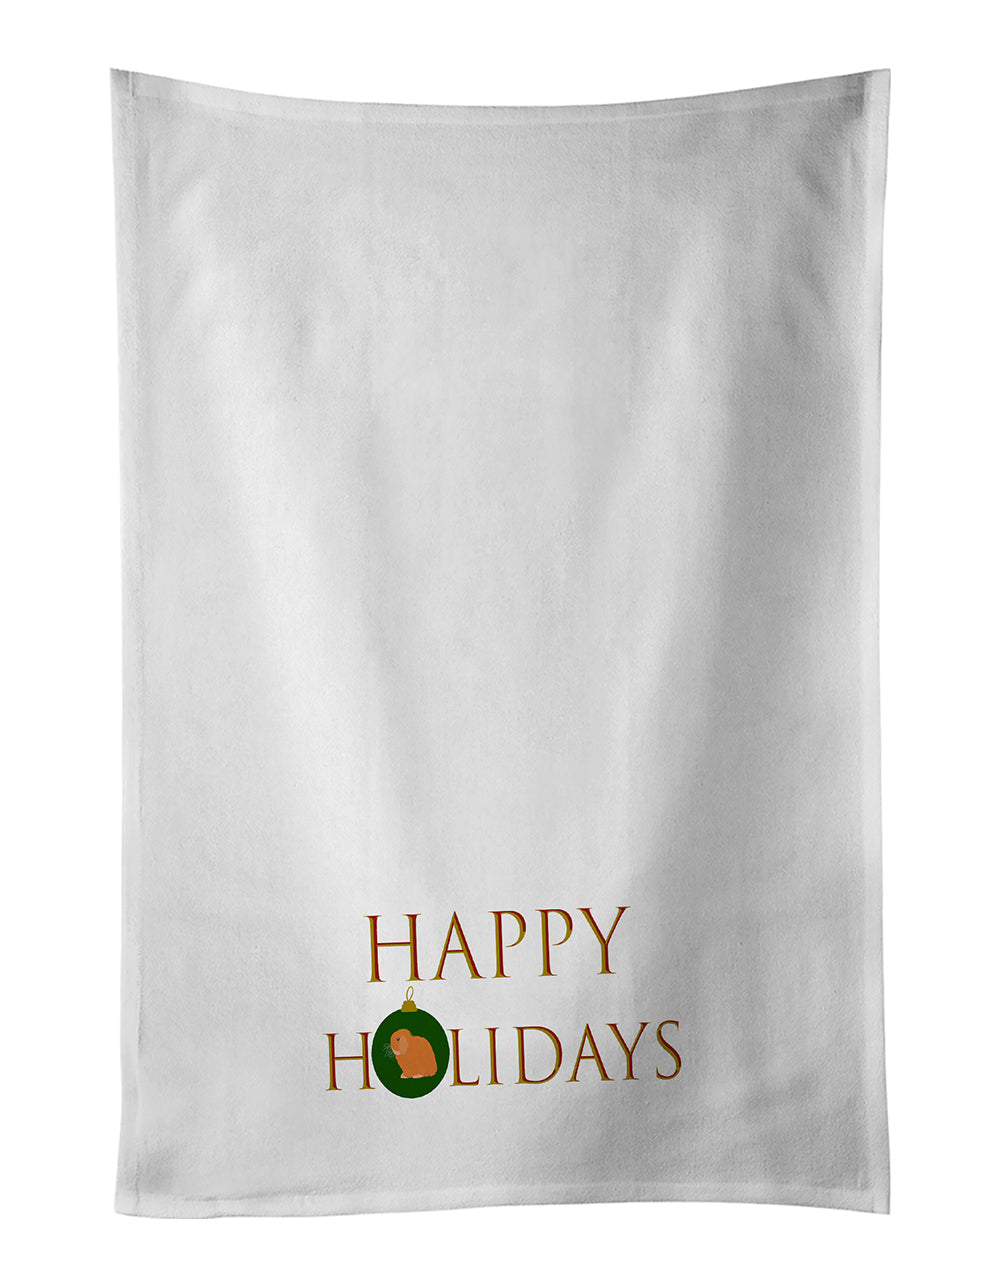 Buy this Rabbits - Holland Lop Rabbit Happy Holidays White Kitchen Towel Set of 2